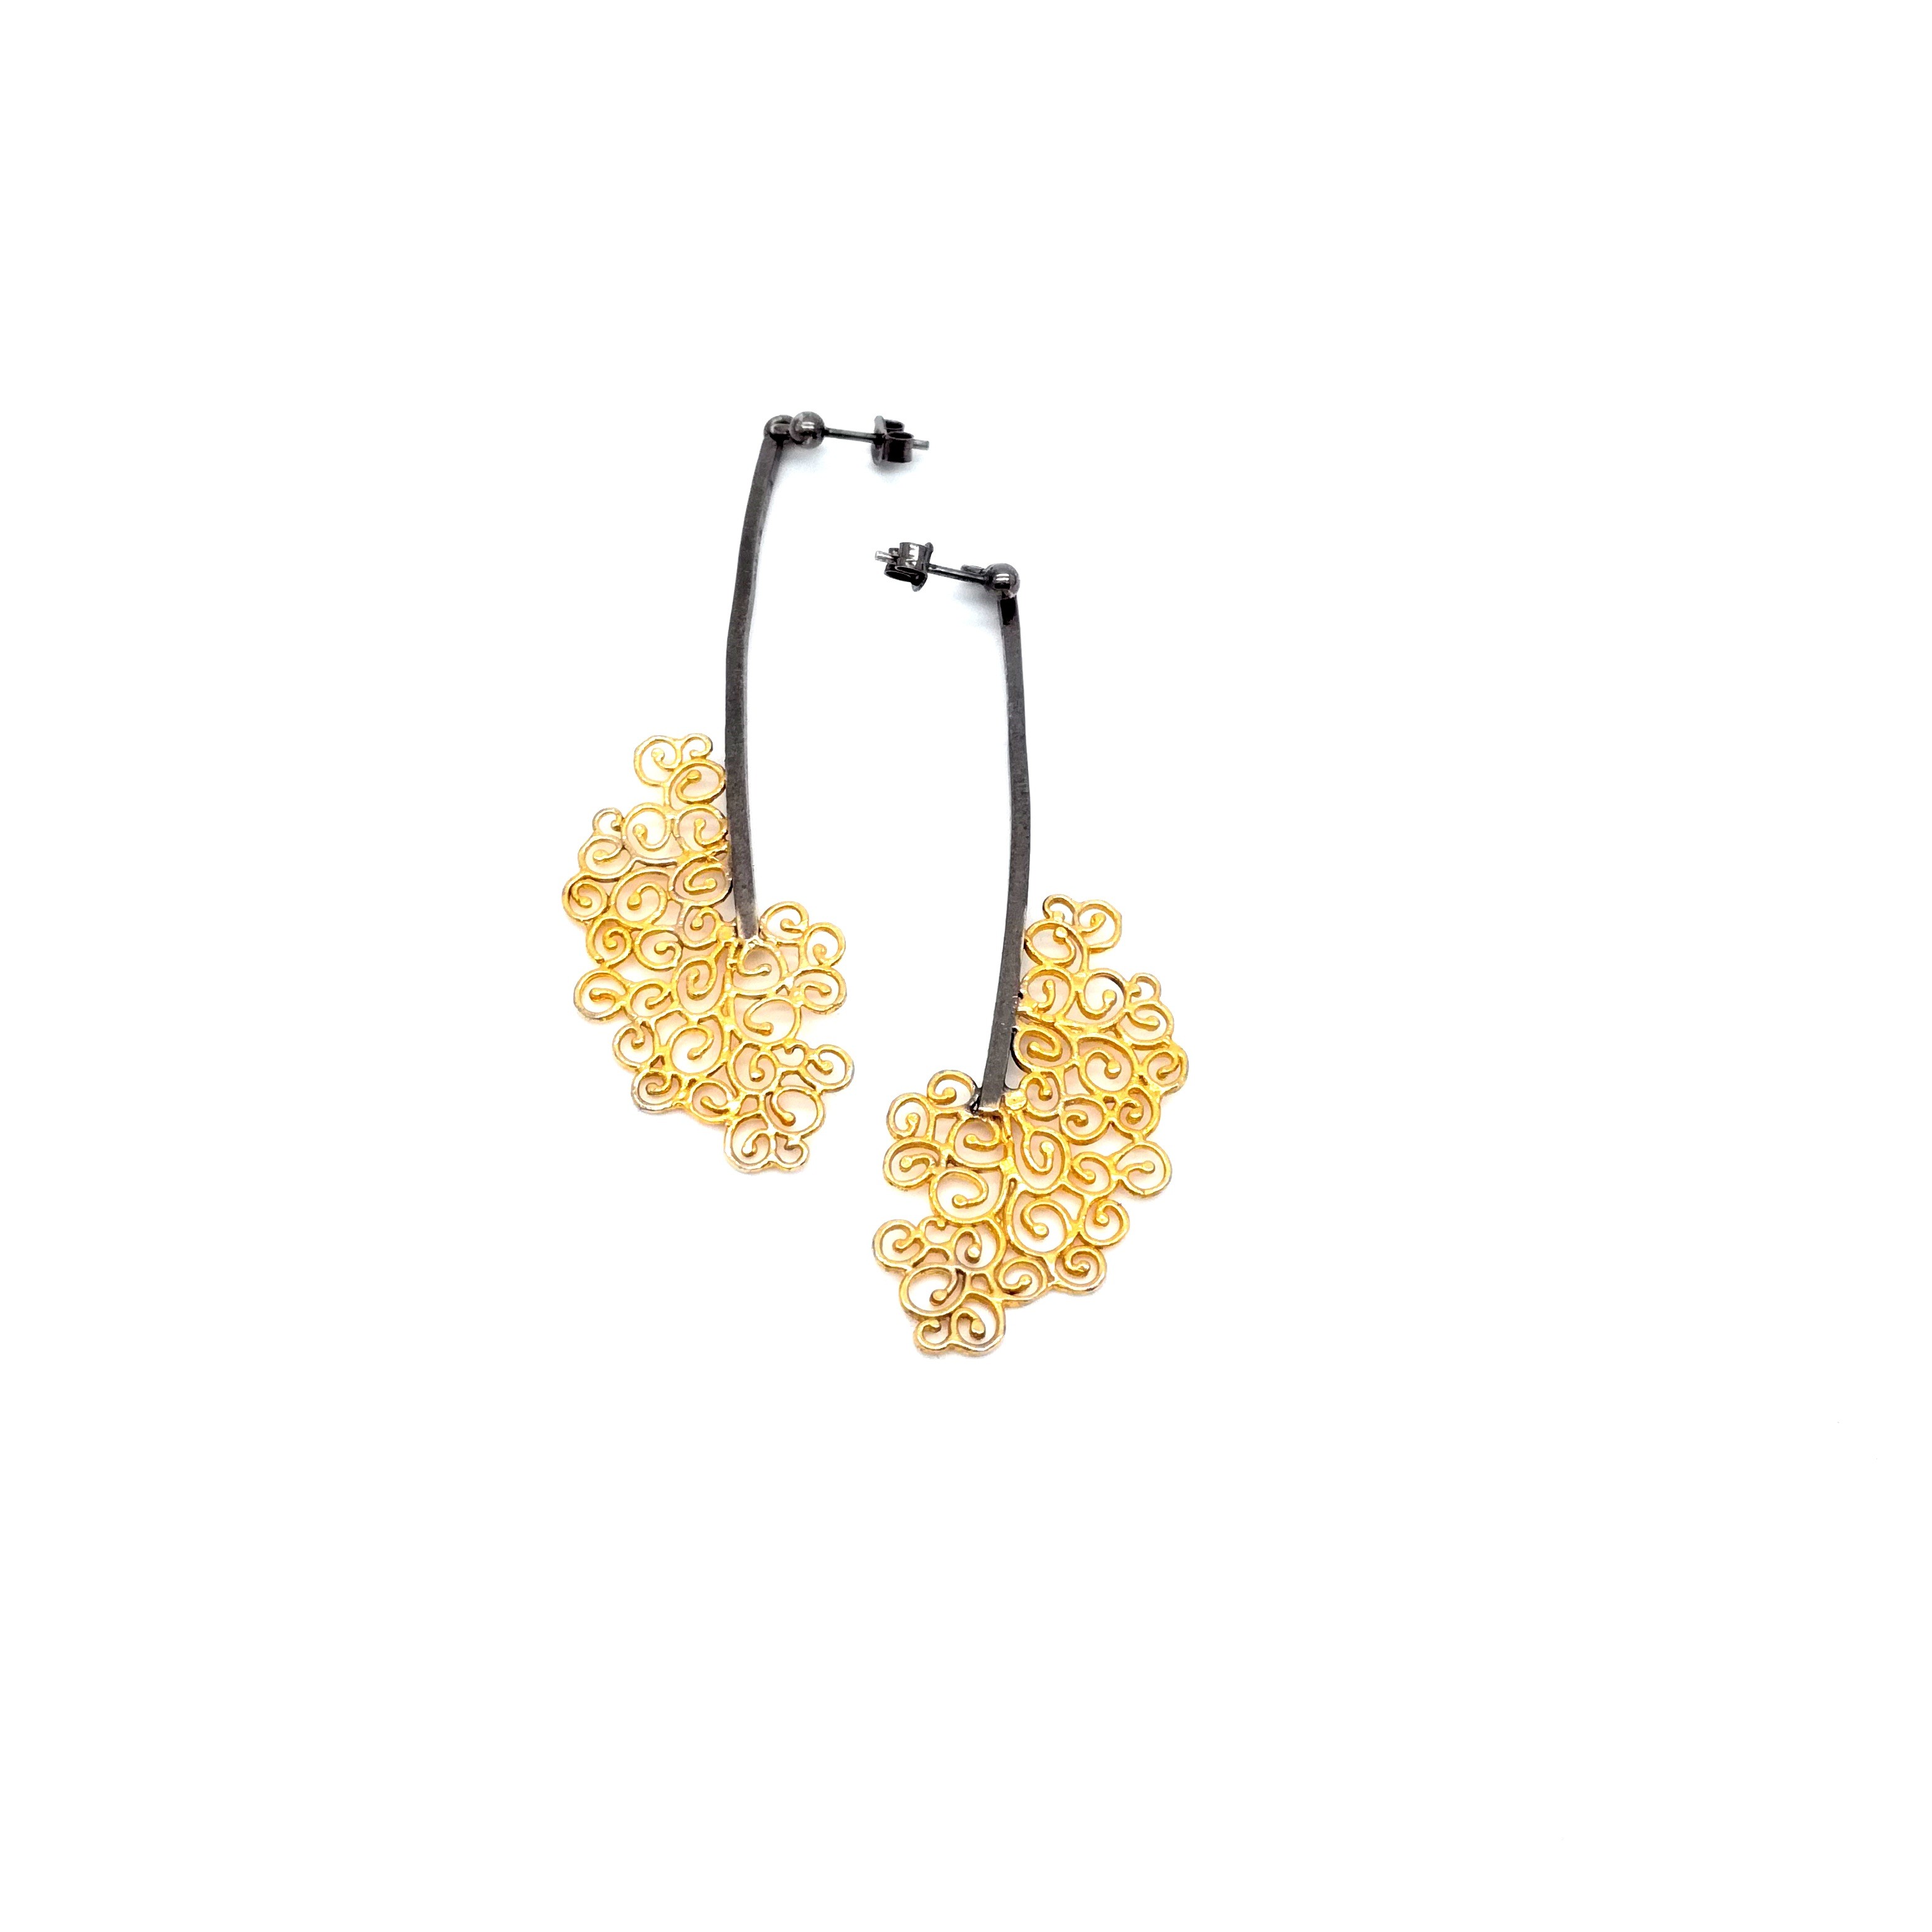 Silver earrings 925 black rhodium and gold plated 